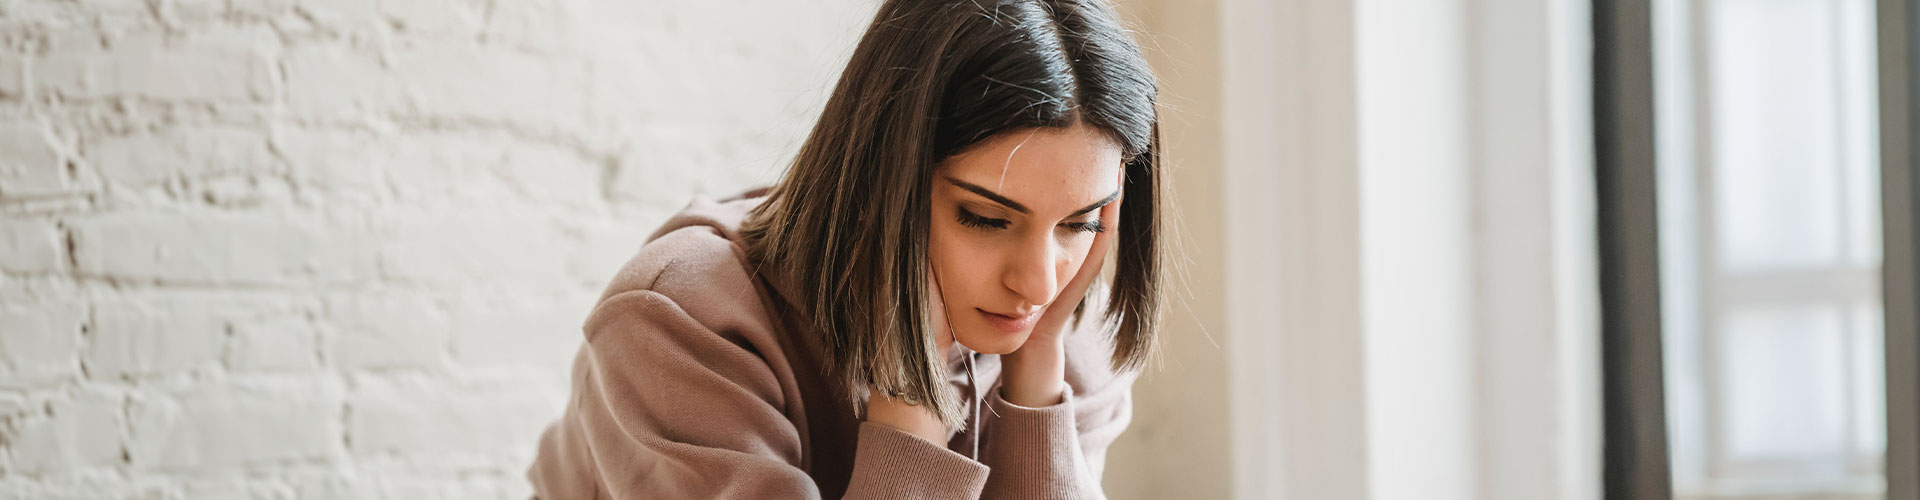 Photo of a woman with a worried and stressed look before looking for counseling for anxiety in Chicago, IL at Marble Wellness. 63122 | forrest glen 60630 | Lincoln Park is 60614 | north center 60613 | 60618.